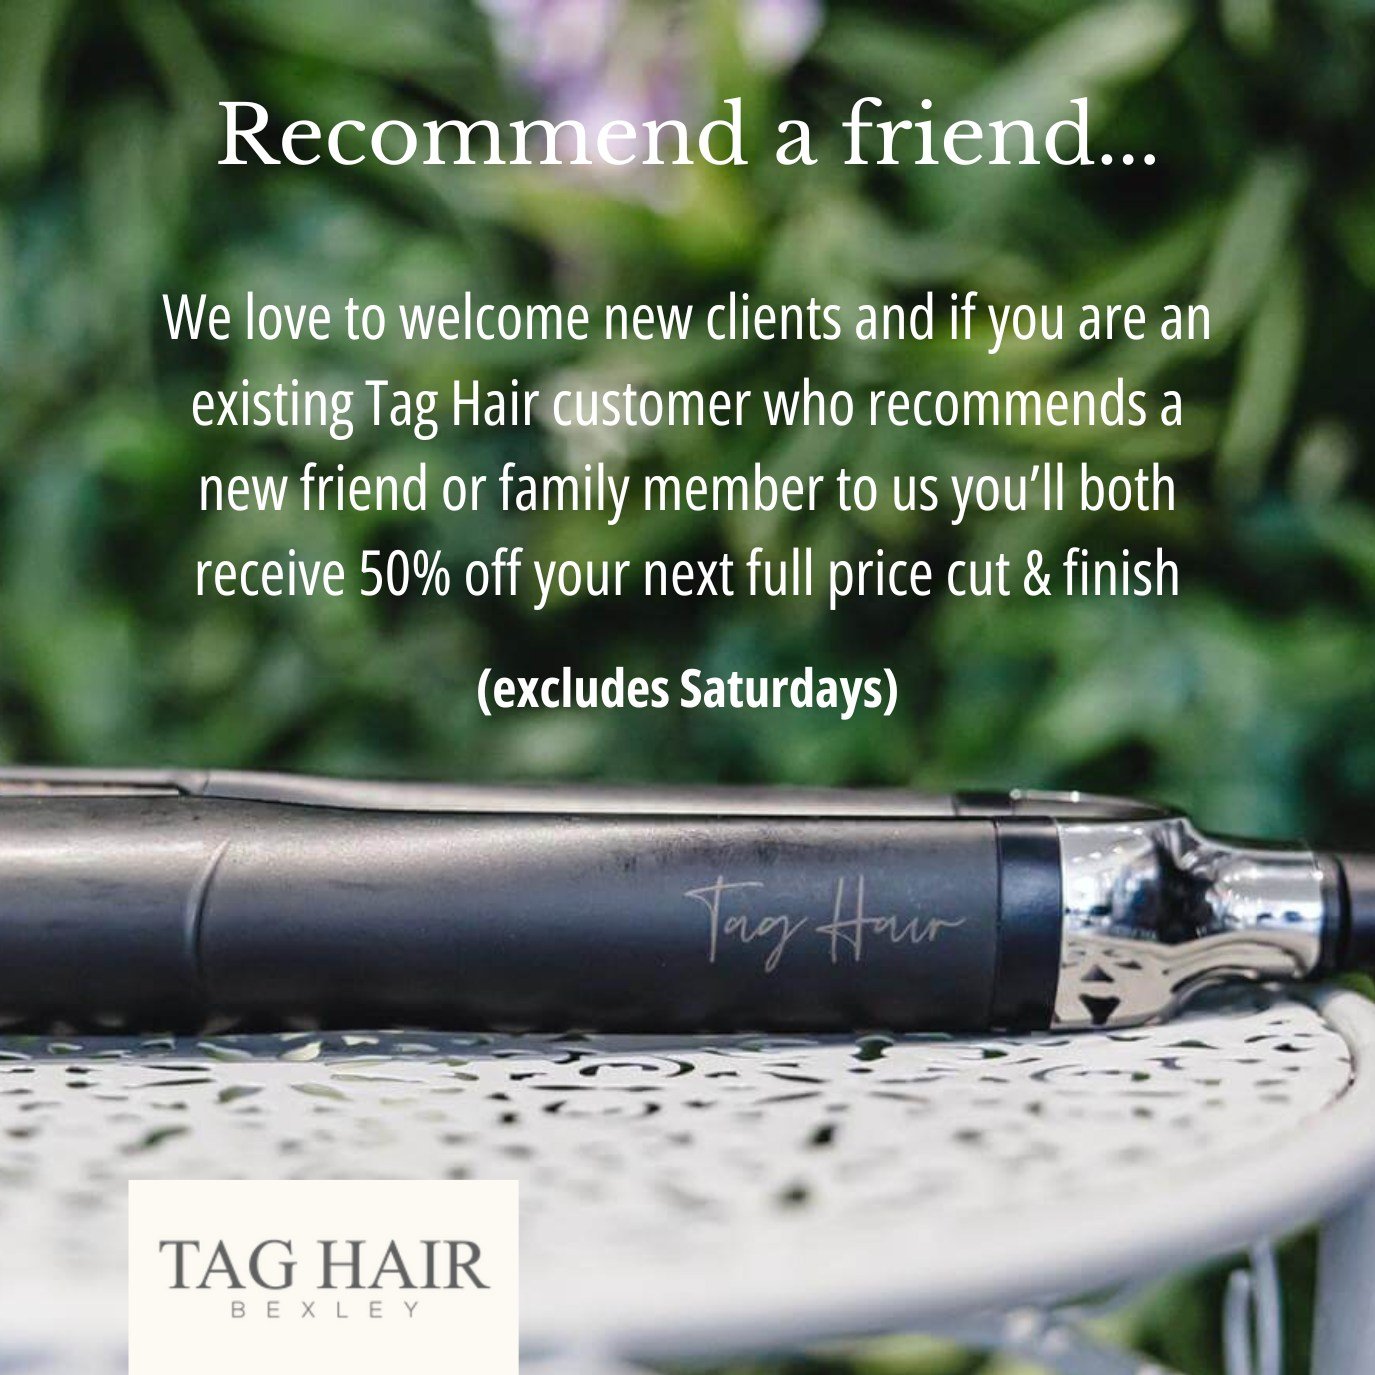 We love to welcome new clients into the Tag Hair salon, and we love to treat our existing clients too! 

Ask for more details about our Recommend a Friend offer next time you are in the salon, or give us a call on 01322 527222

#hairoffers #discounth